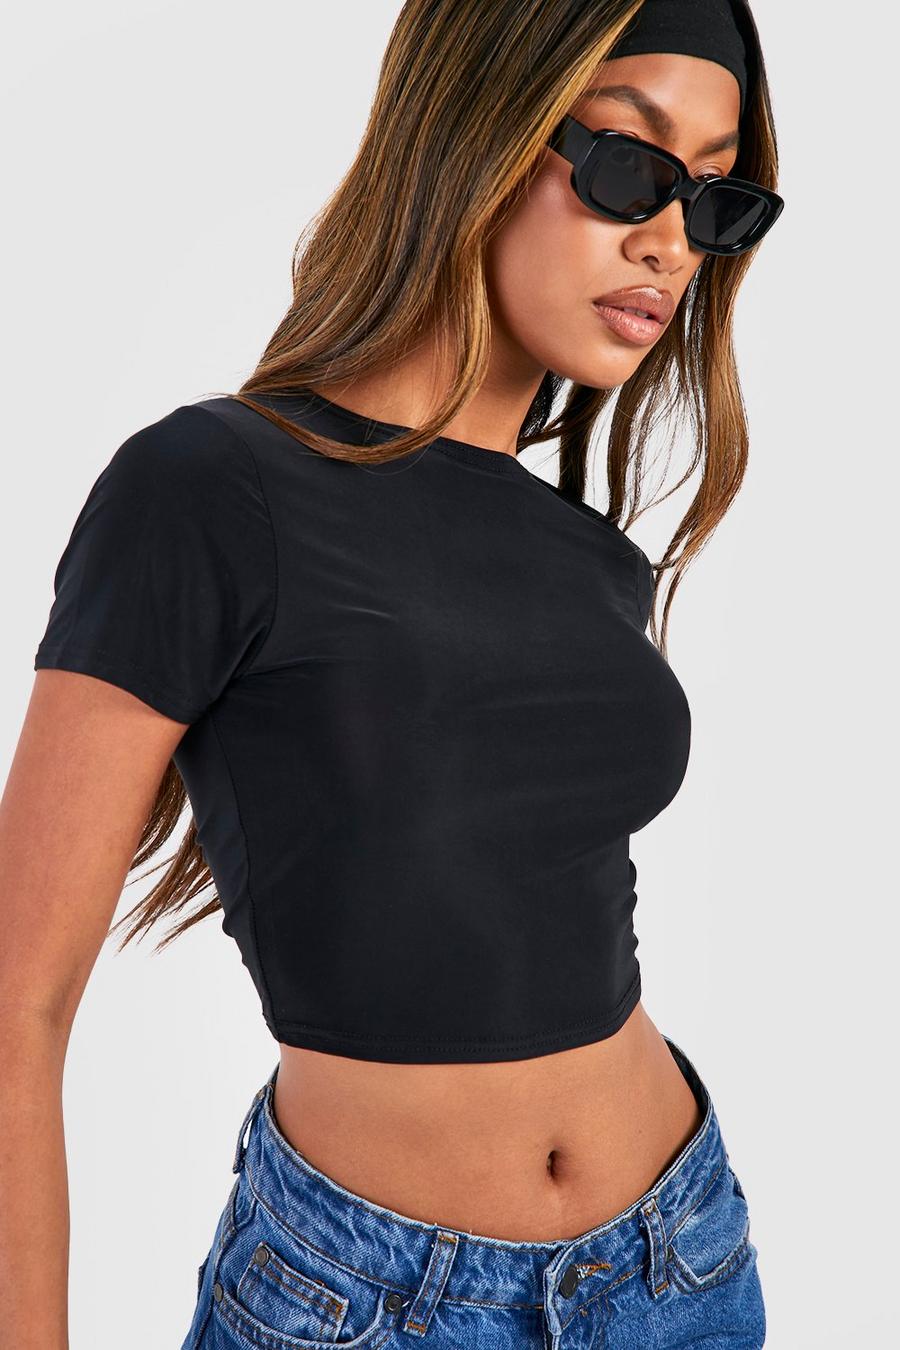 Shirts & Crop Tops  Cropped T - Falke Performance Track Jackets